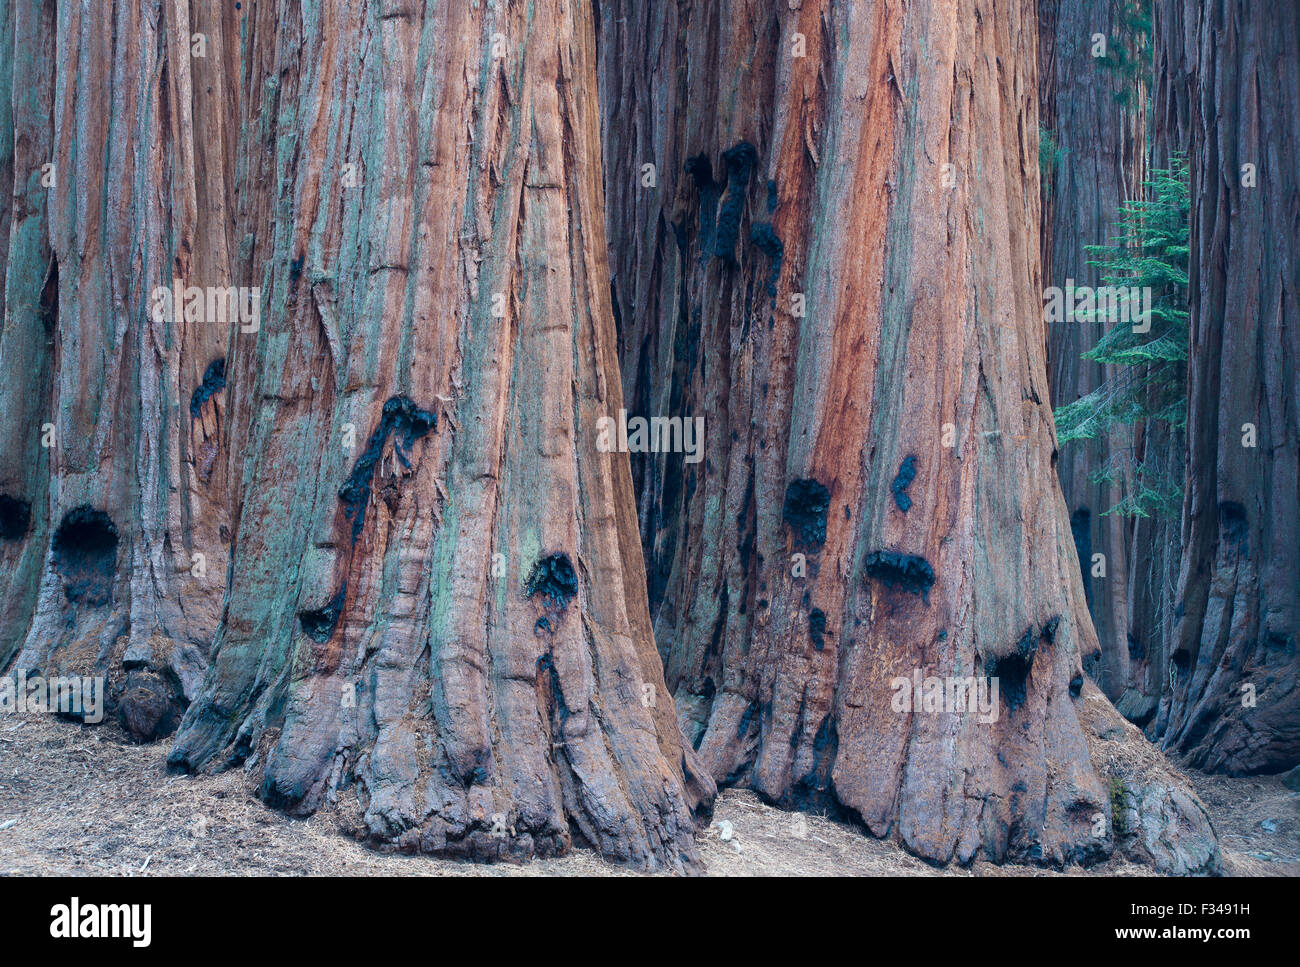 the House Group of giant sequoia trees on the Congress Trail, Sequoia National Park, California, USA Stock Photo